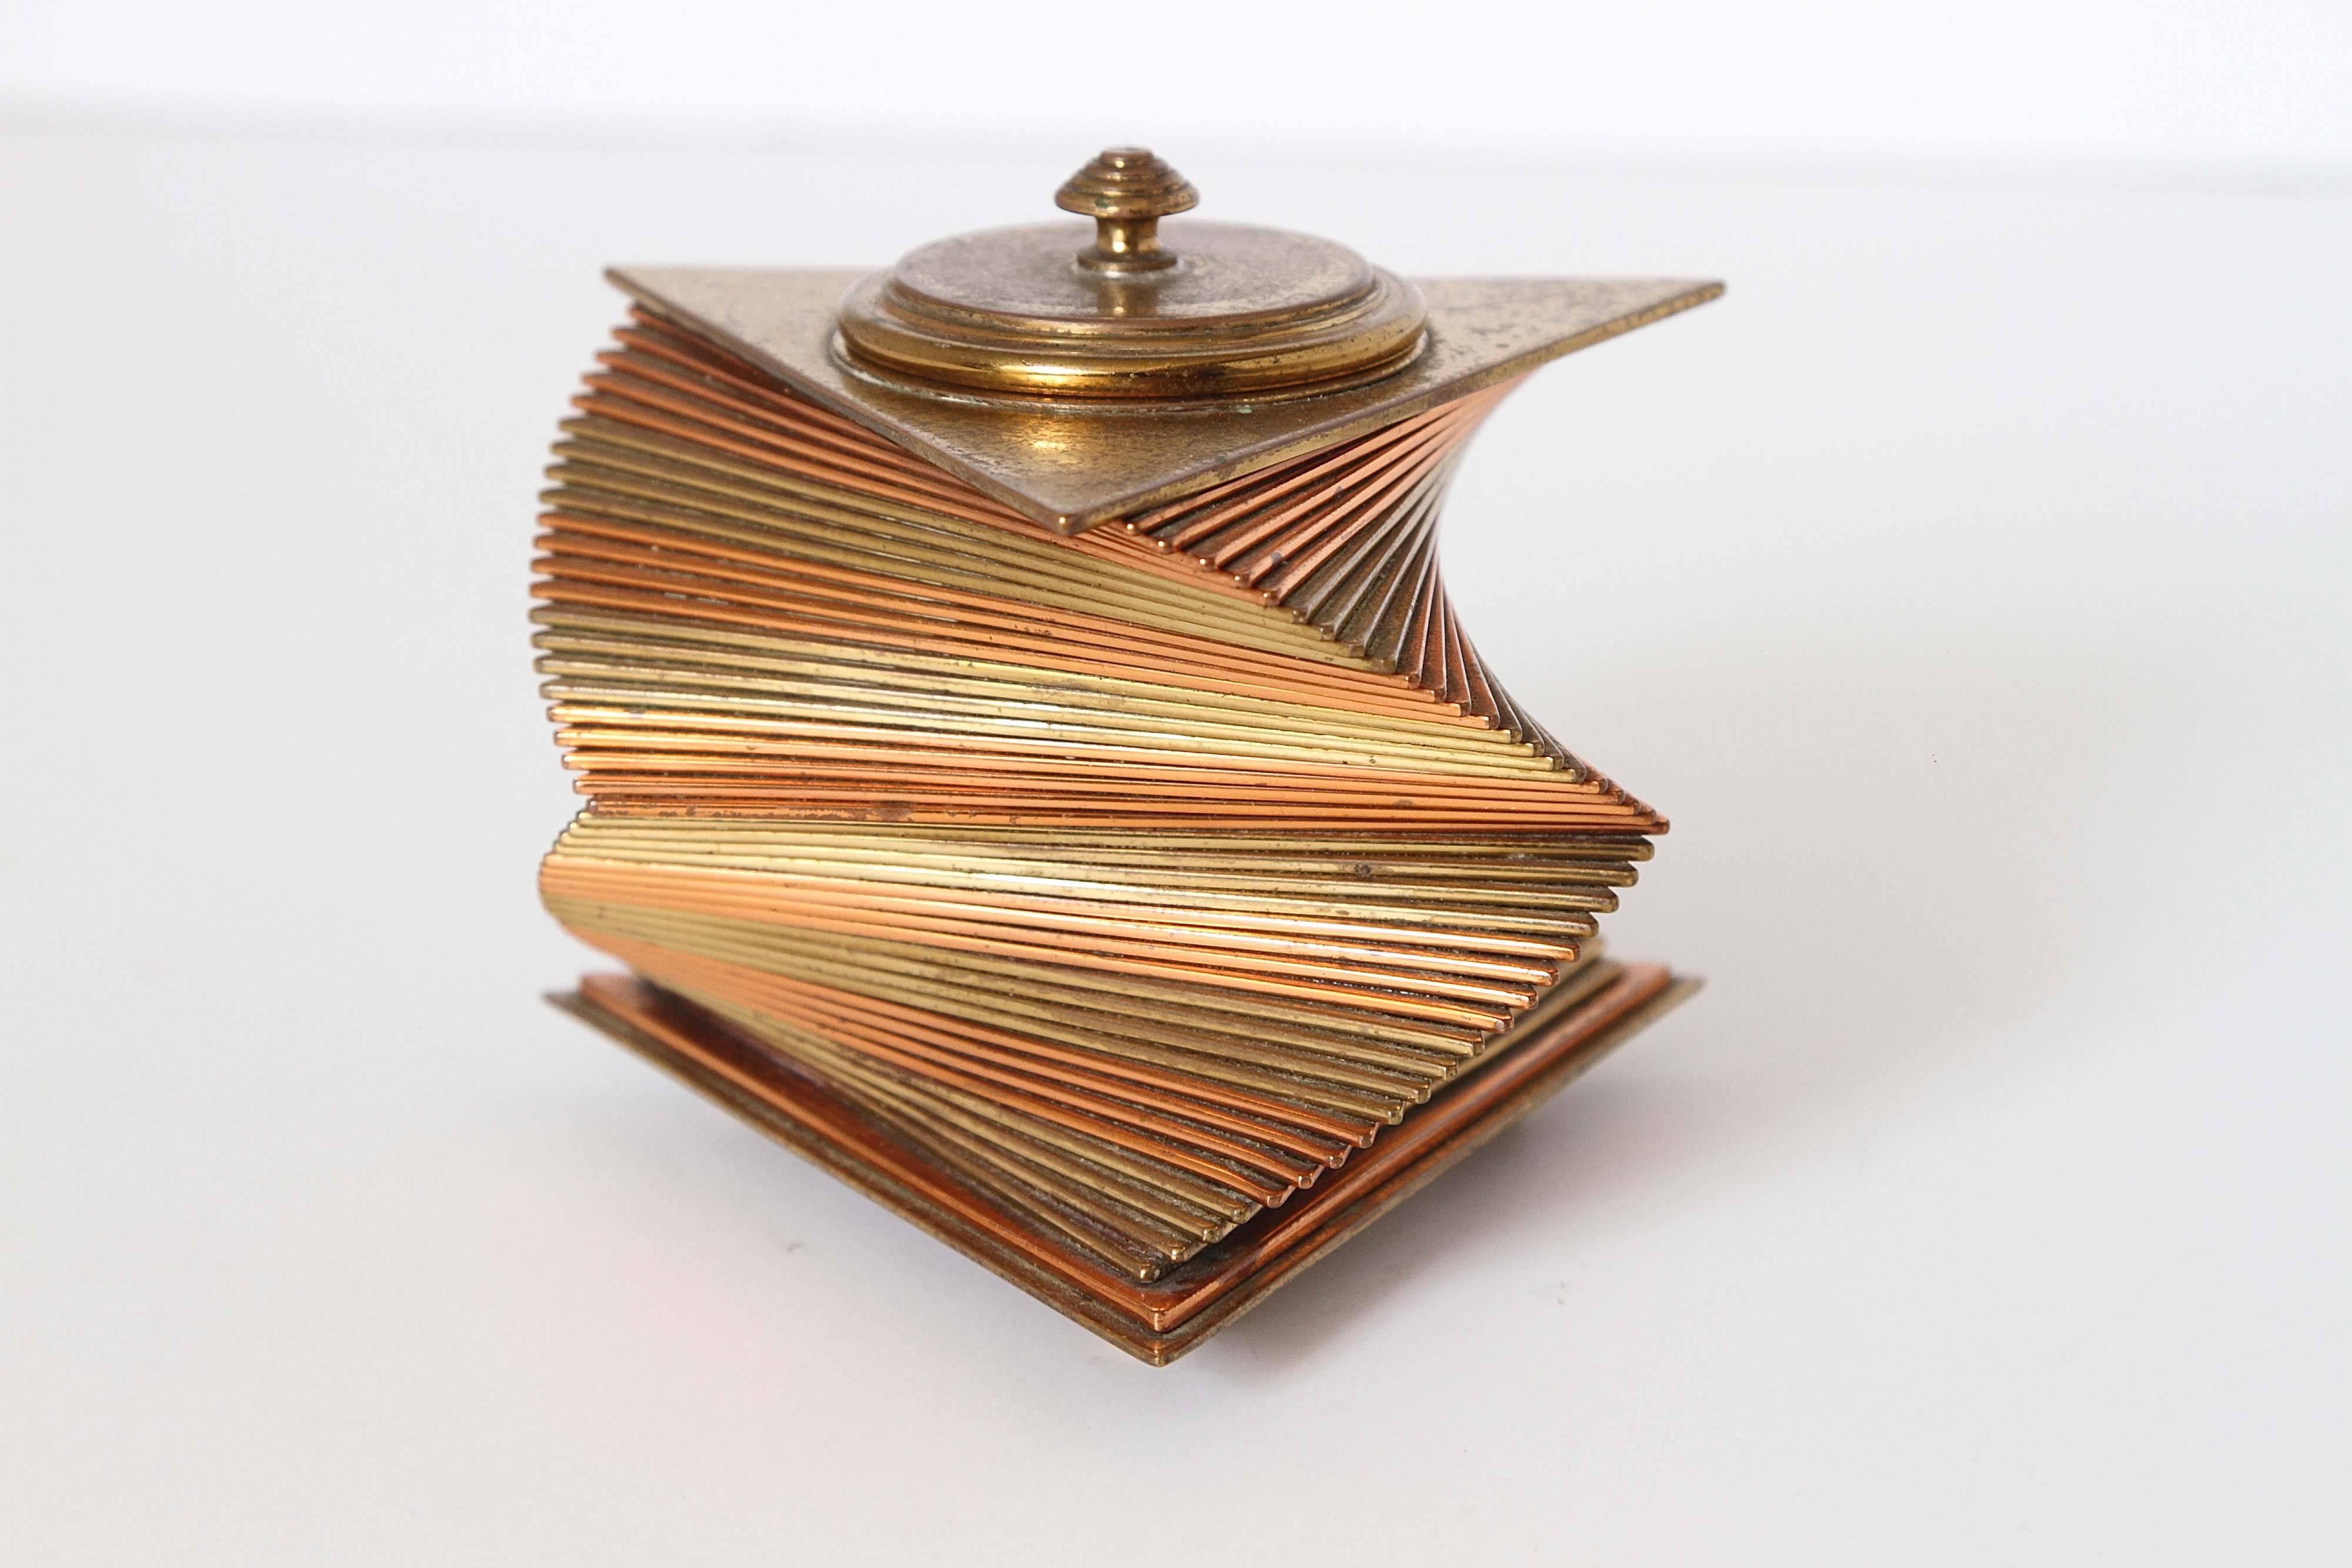 American Otar Machine Age Art Deco Mixed-Metal Lidded Box, Brass and Copper